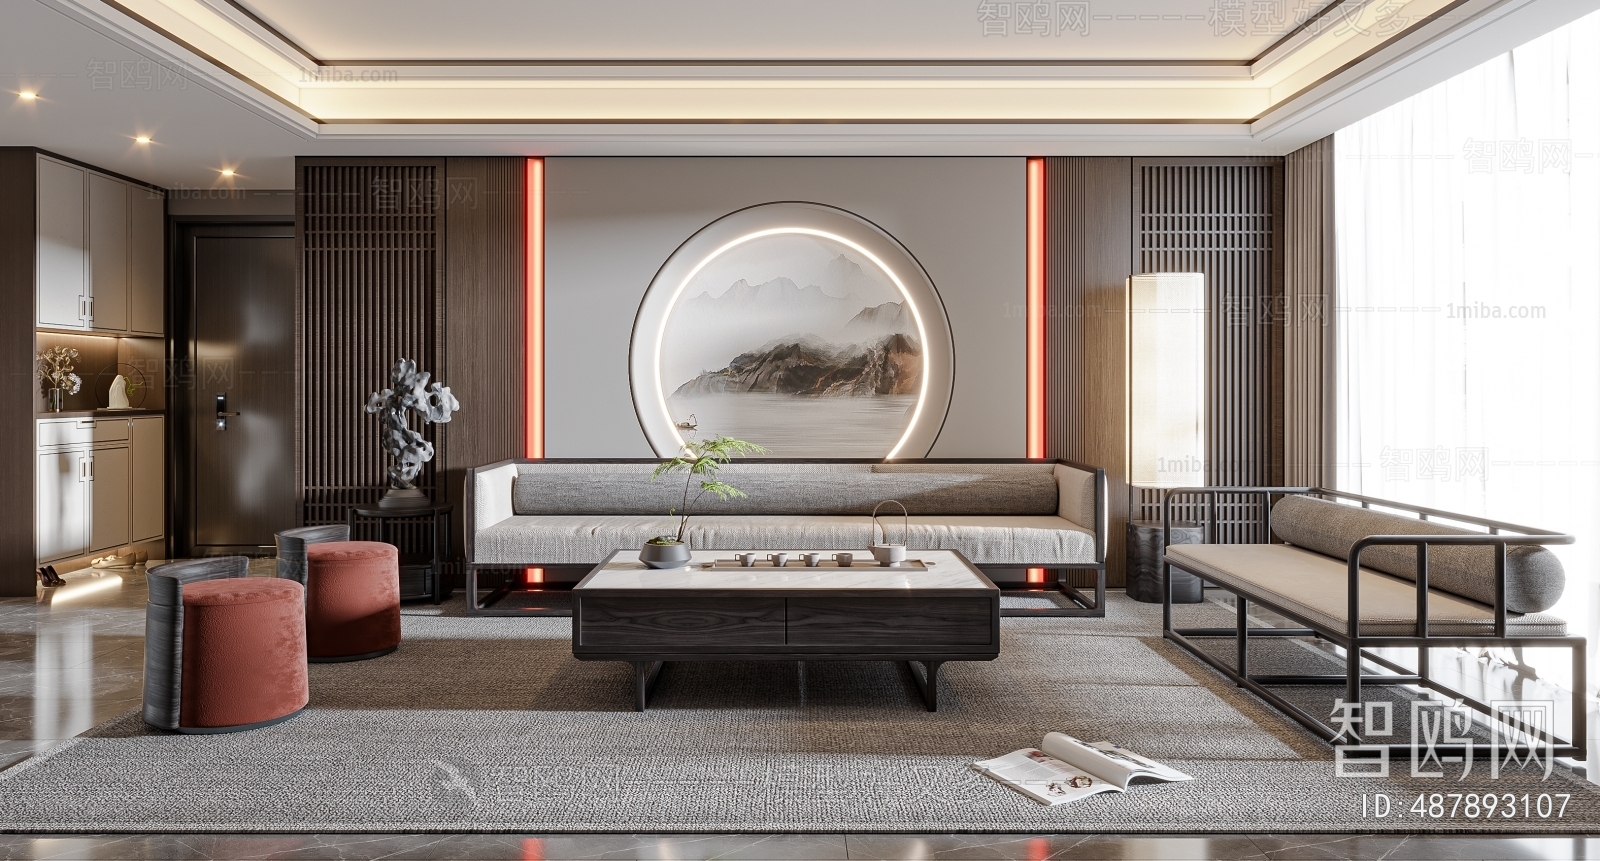 New Chinese Style A Living Room